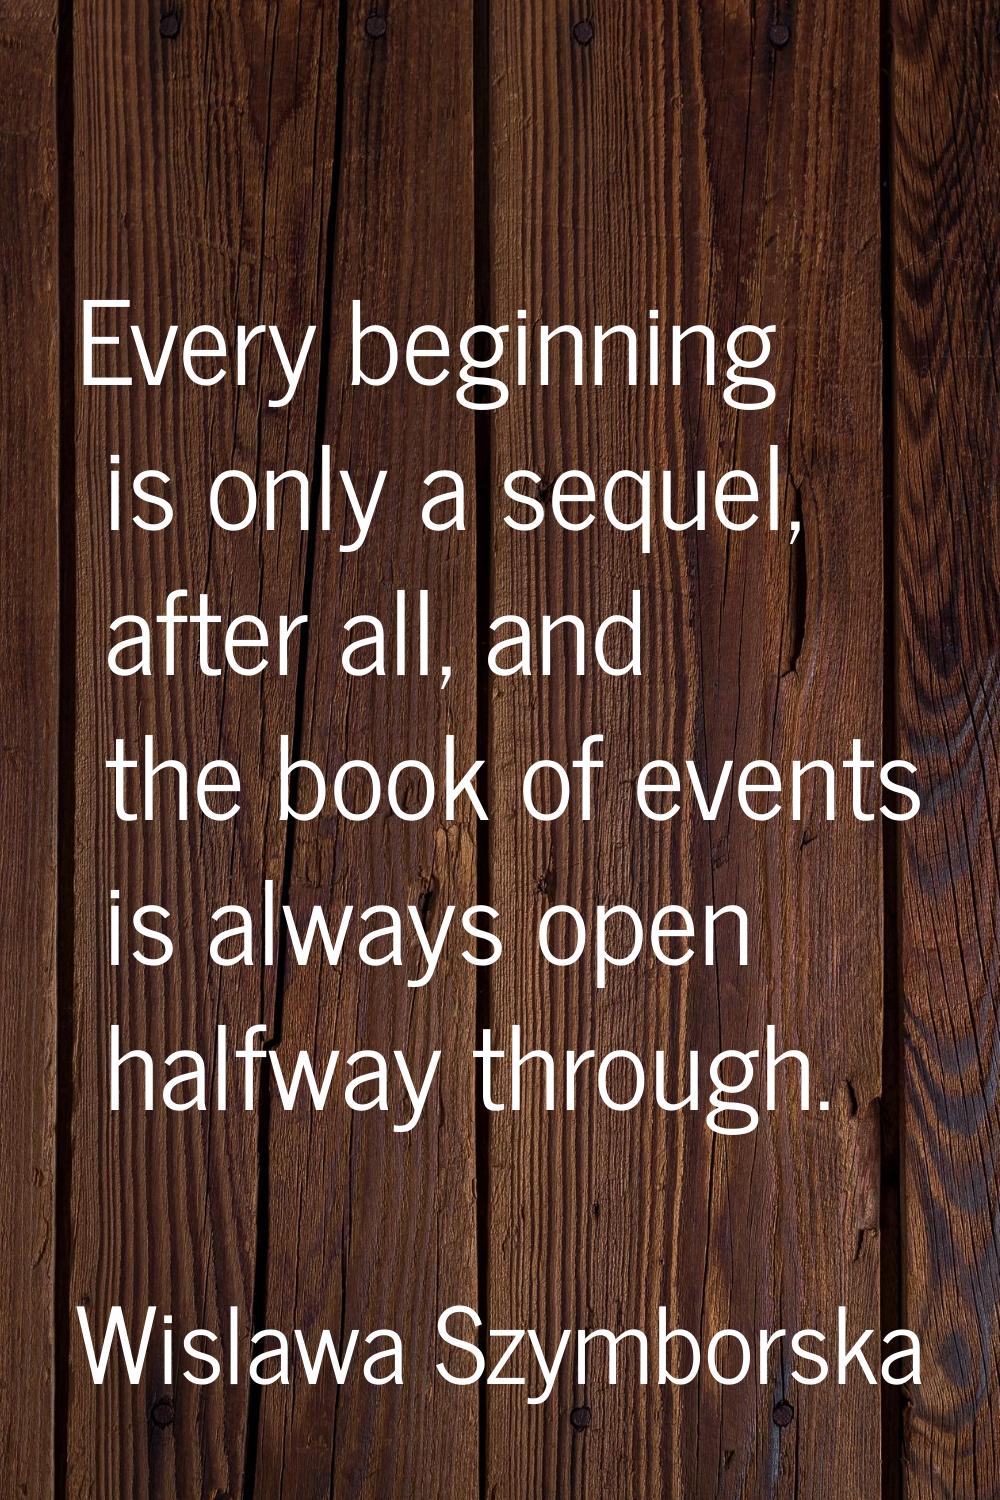 Every beginning is only a sequel, after all, and the book of events is always open halfway through.